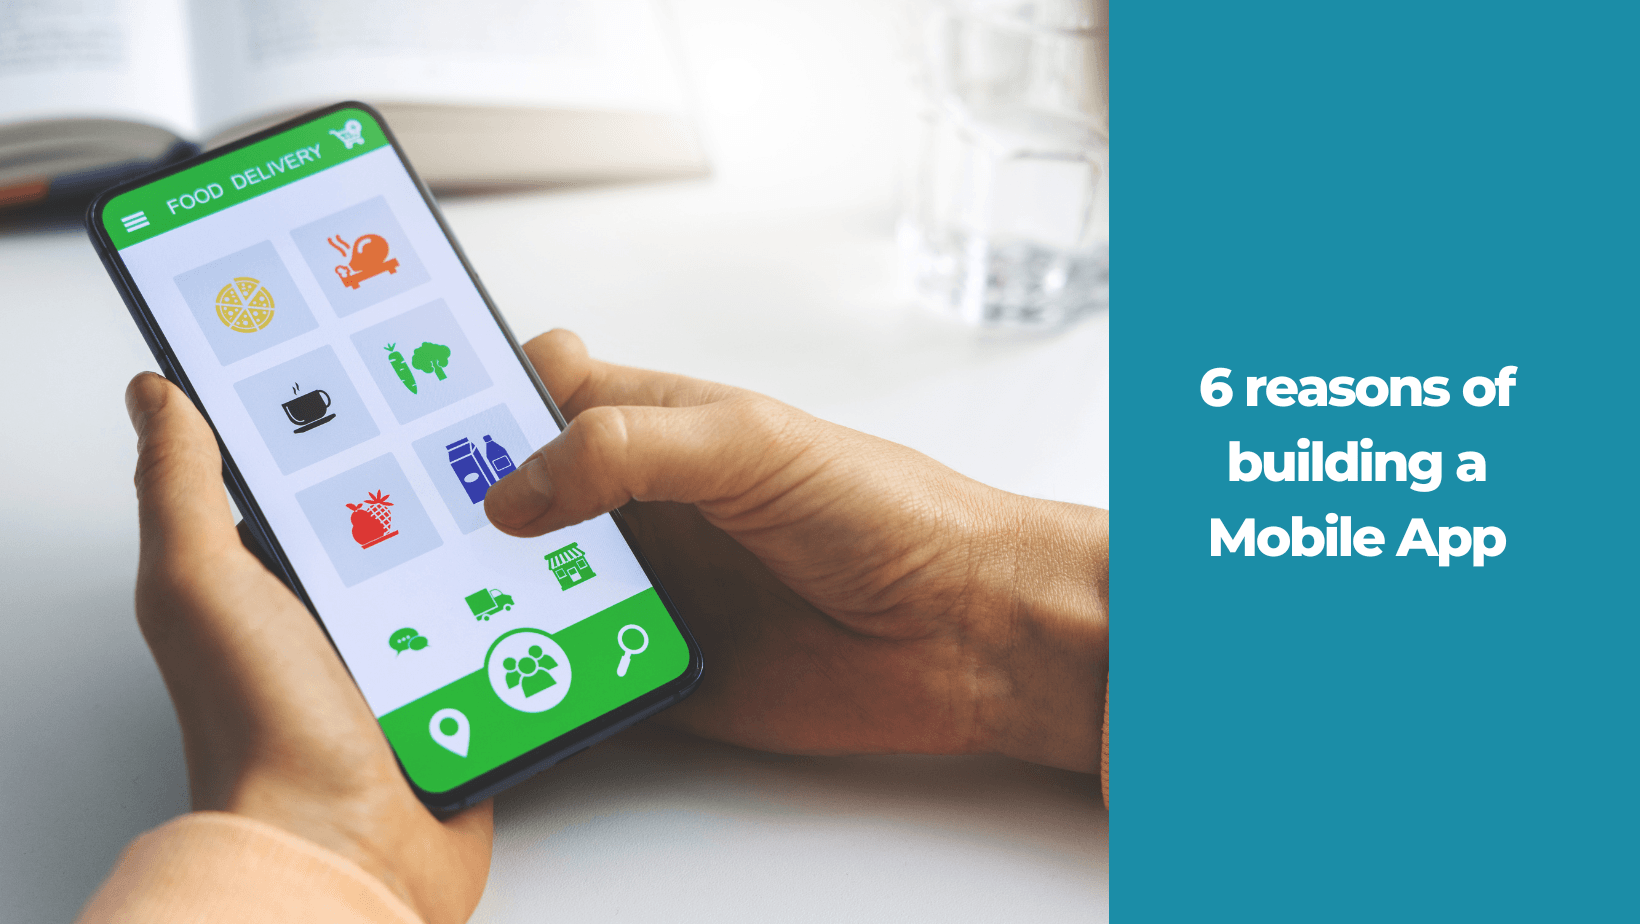 Mobile Apps offer businesses a lot of opportunities as they help to improve the referral rates. They can also boost new product and service adoption rates.